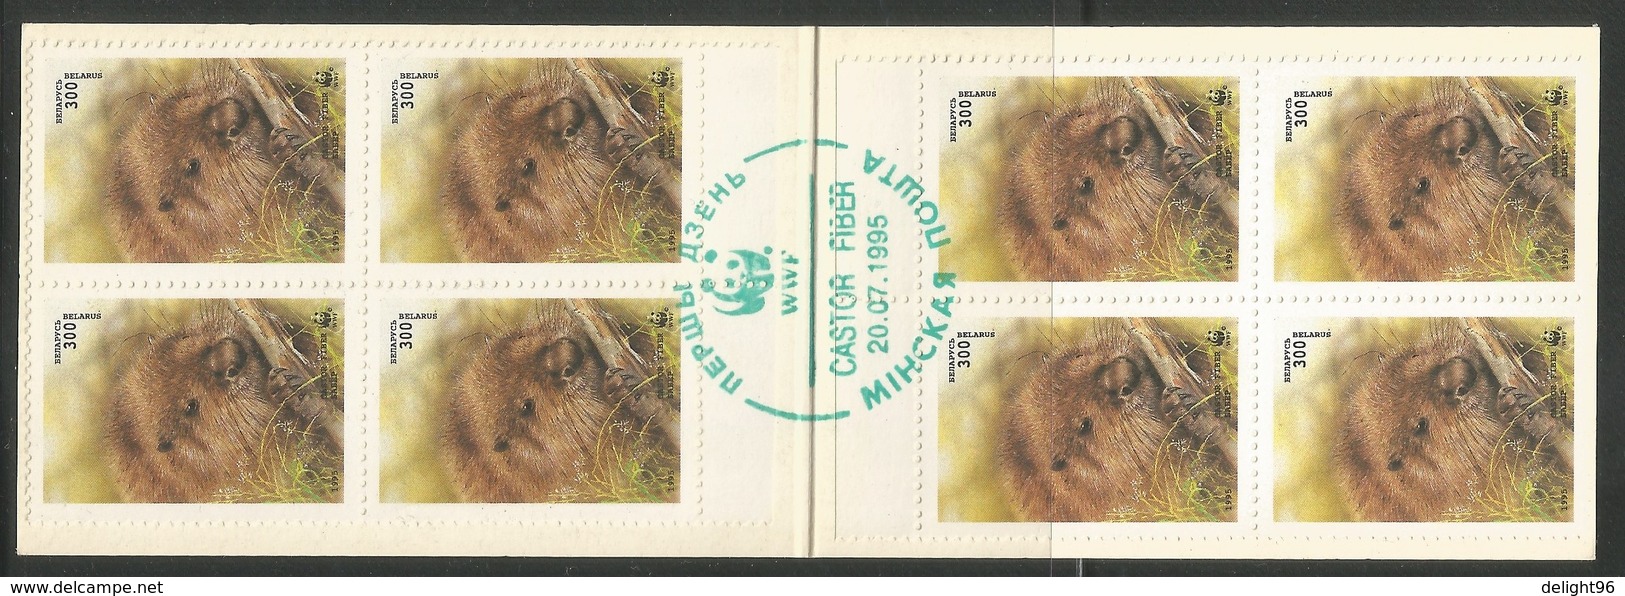 1995 Belarus WWF Beaver Booklet (private / Unofficial) (** / MNH / UMM) - Unused Stamps